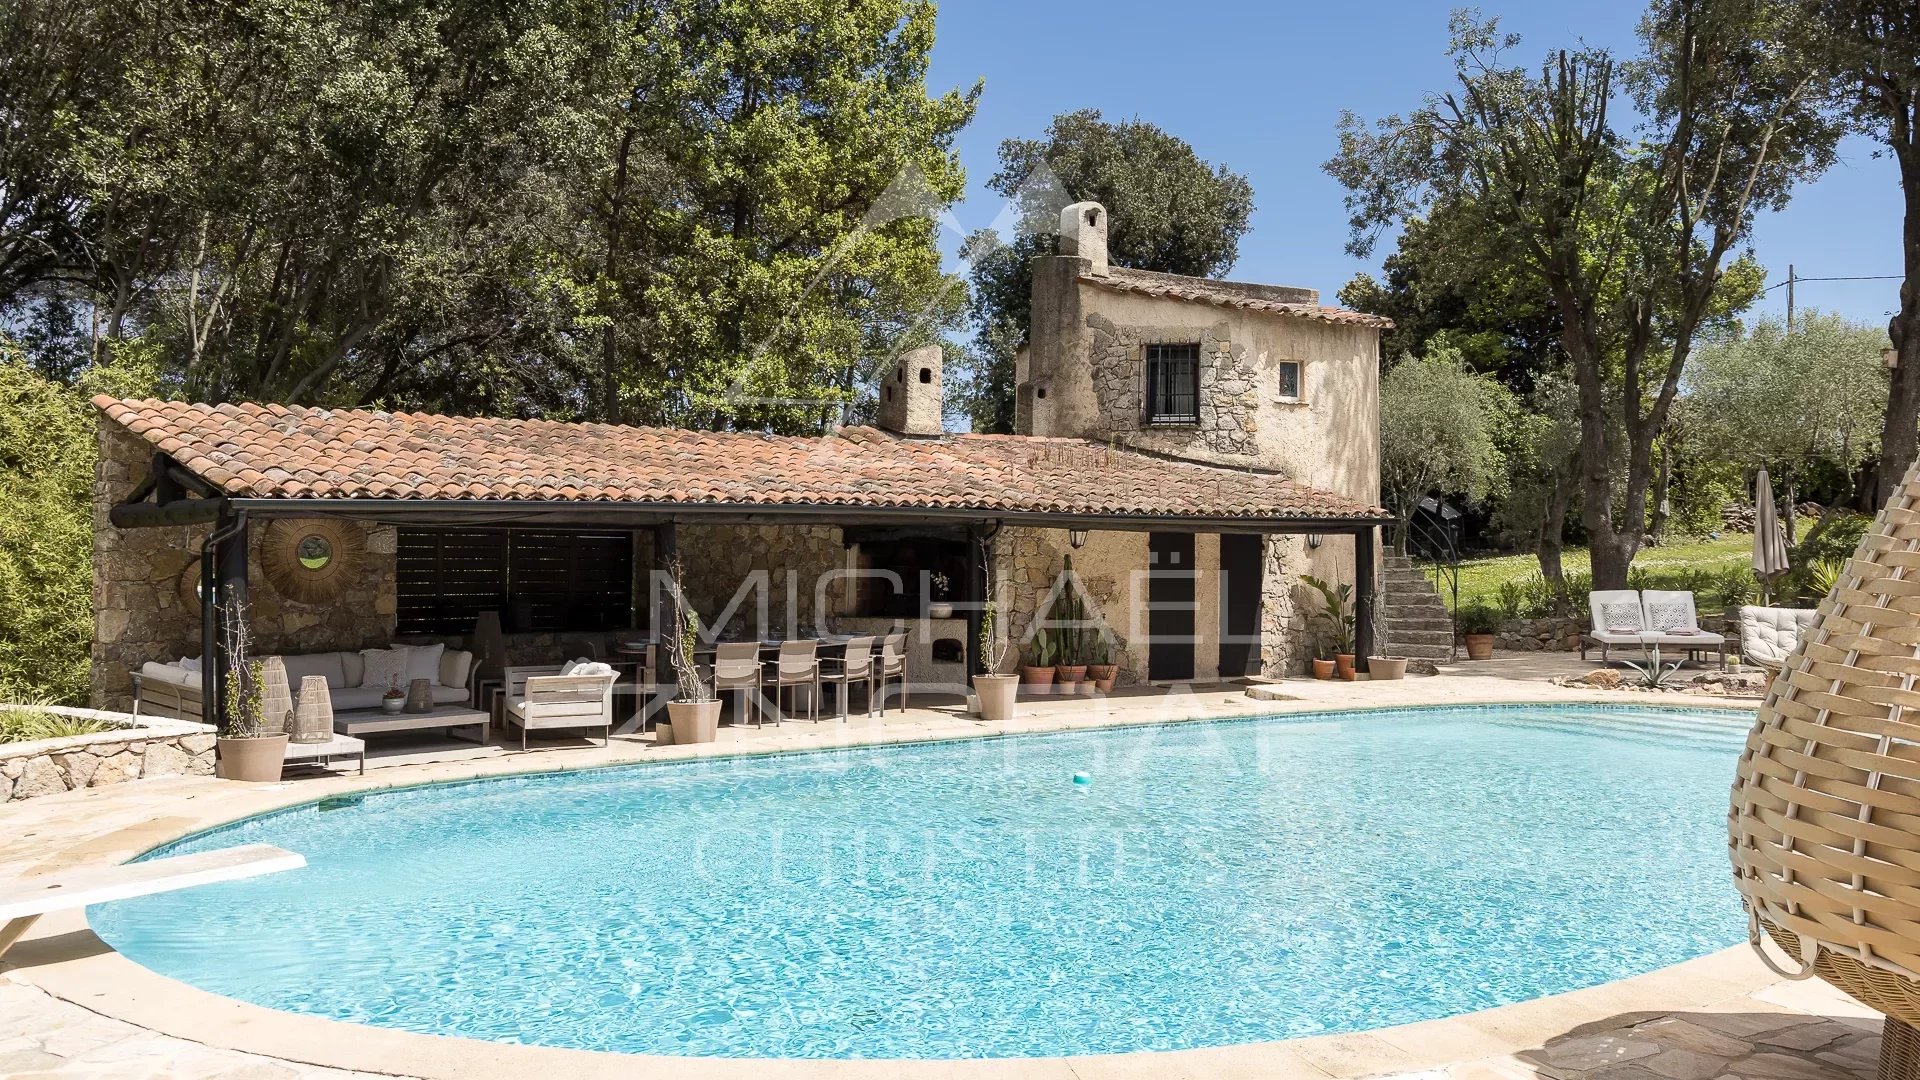 Valbonne - Close to the village - 5 bedrooms